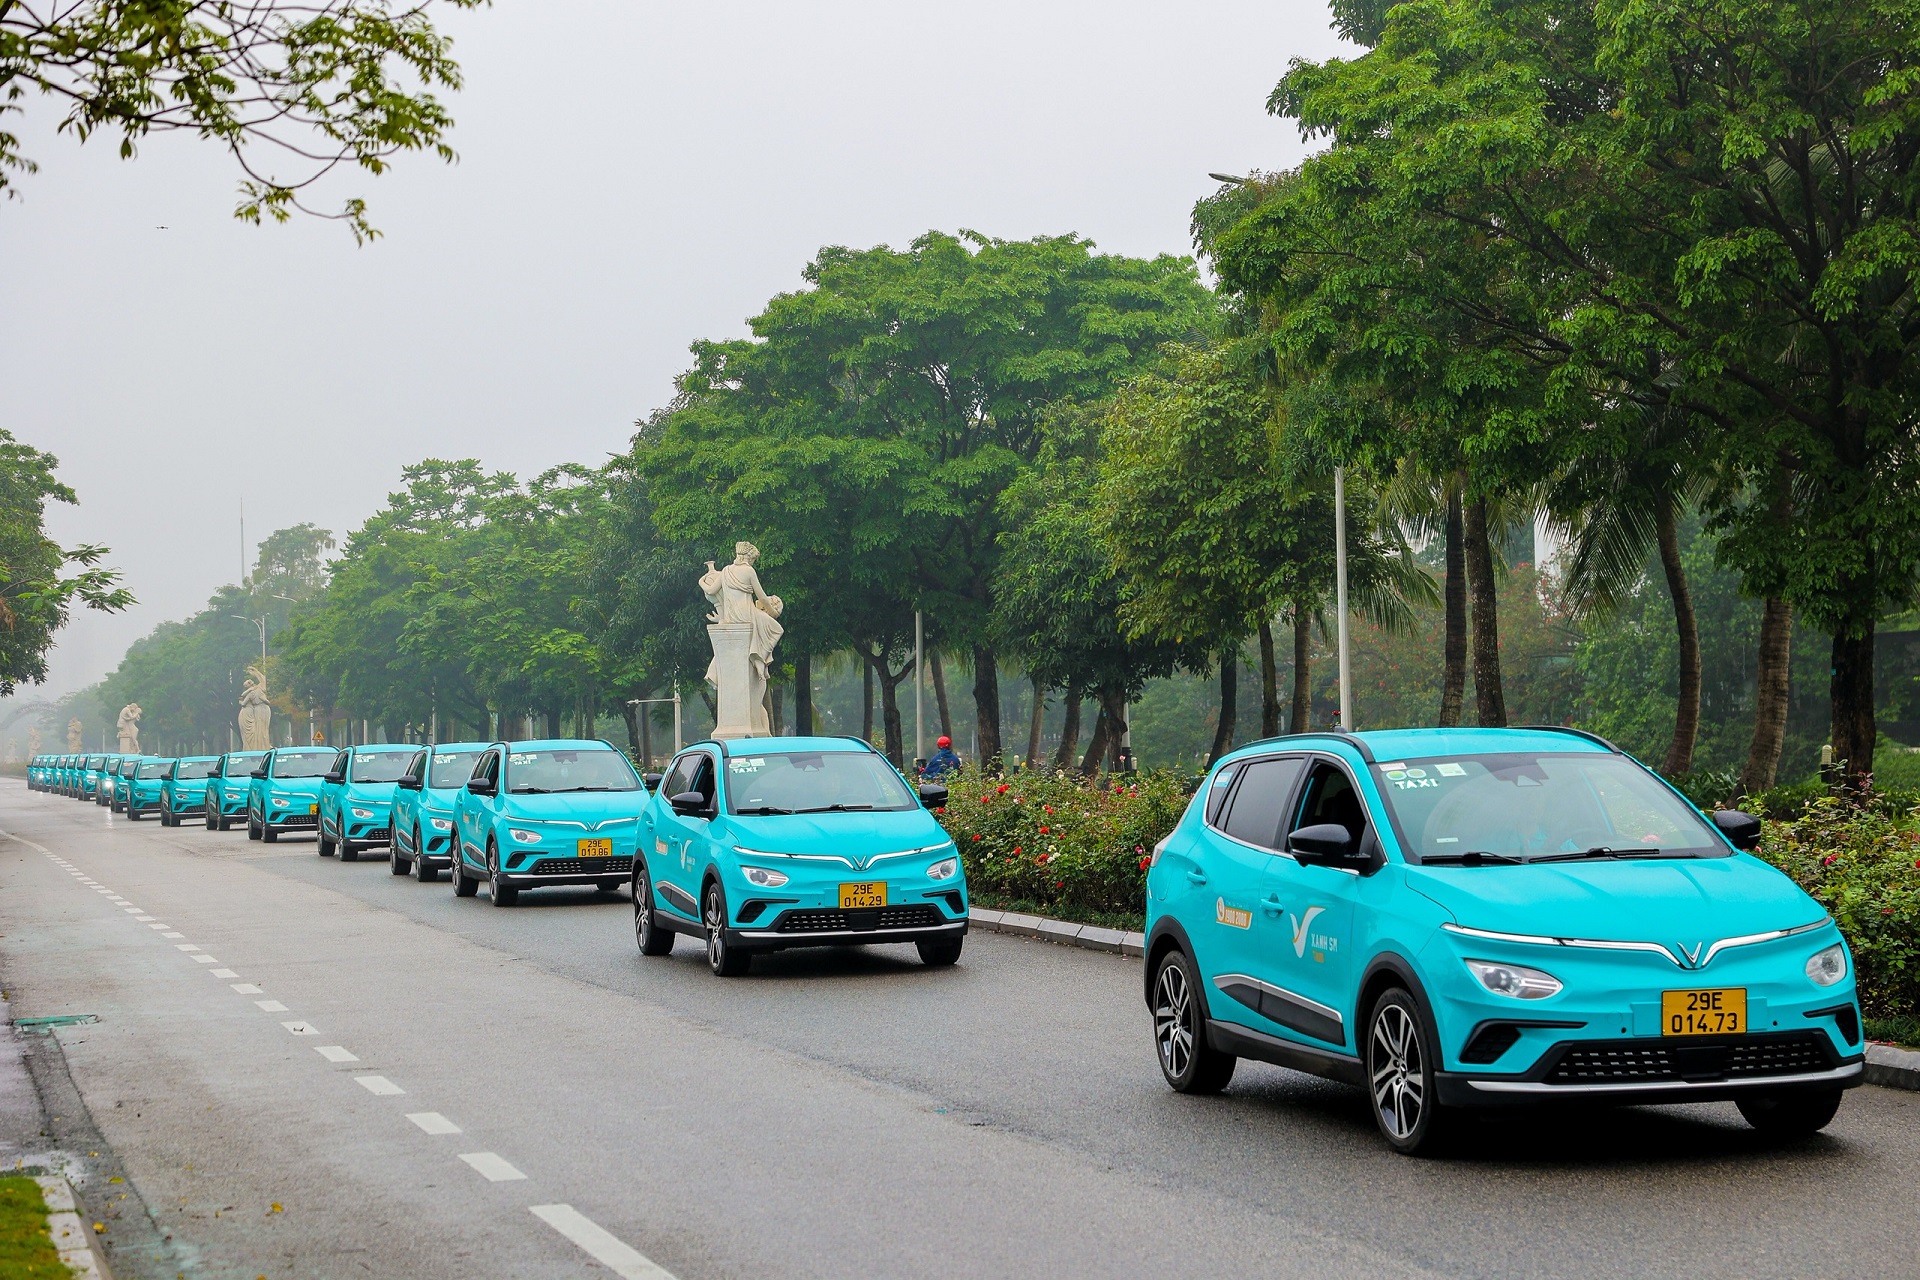 gsm officially launches vietnams first pure electric taxi firm